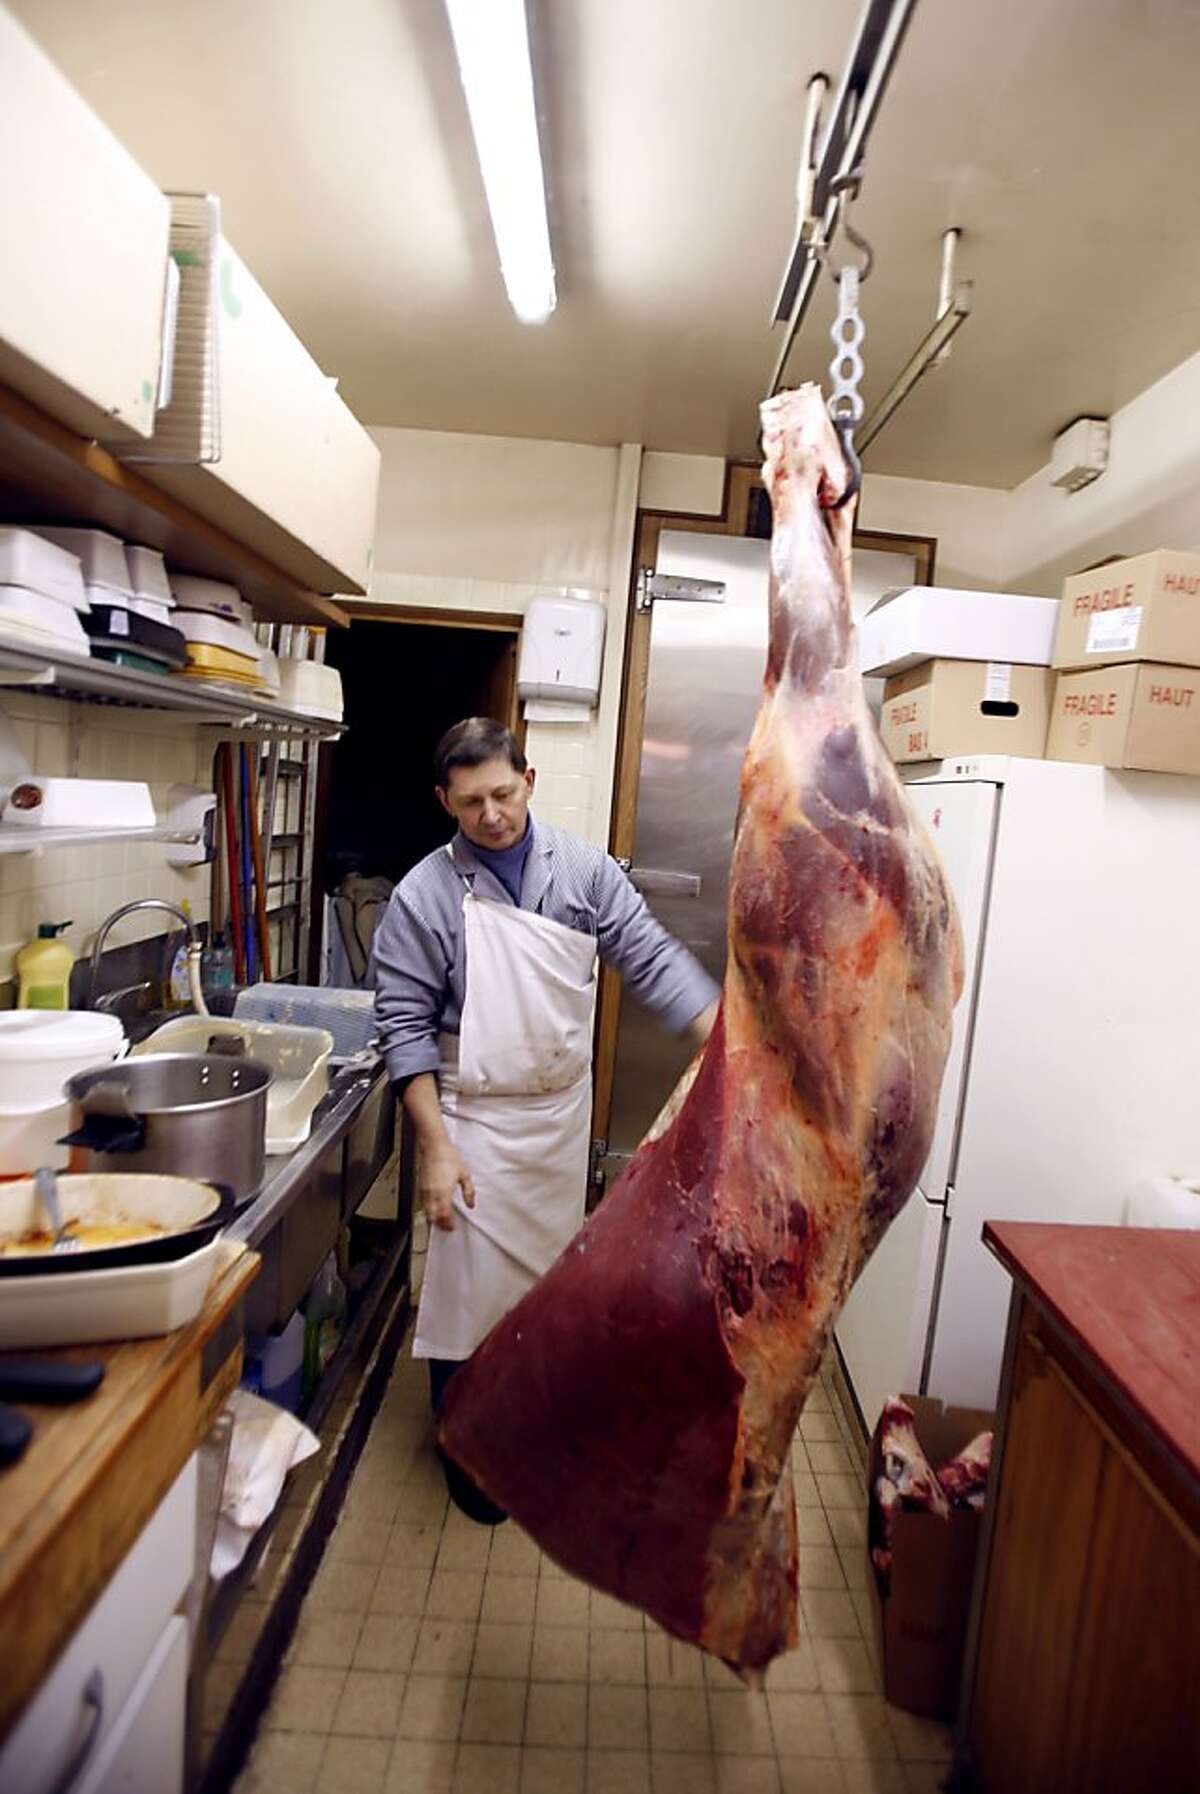 (FILES) In this file picture taken on January 18, 2007 a butcher prepares horse-meat at a specialist butchers shop in Paris. British Prime Minister David Cameron voiced concern about the "extremely disturbing" discovery of horsemeat in beefburgers sold in supermarket giants. While horsemeat is a common sight in central Asia, China, Latin America and parts of Europe, it is considered taboo by most British and Irish consumers. AFP PHOTO/CHRISTOPHE SIMONCHRISTOPHE SIMON/AFP/Getty Images